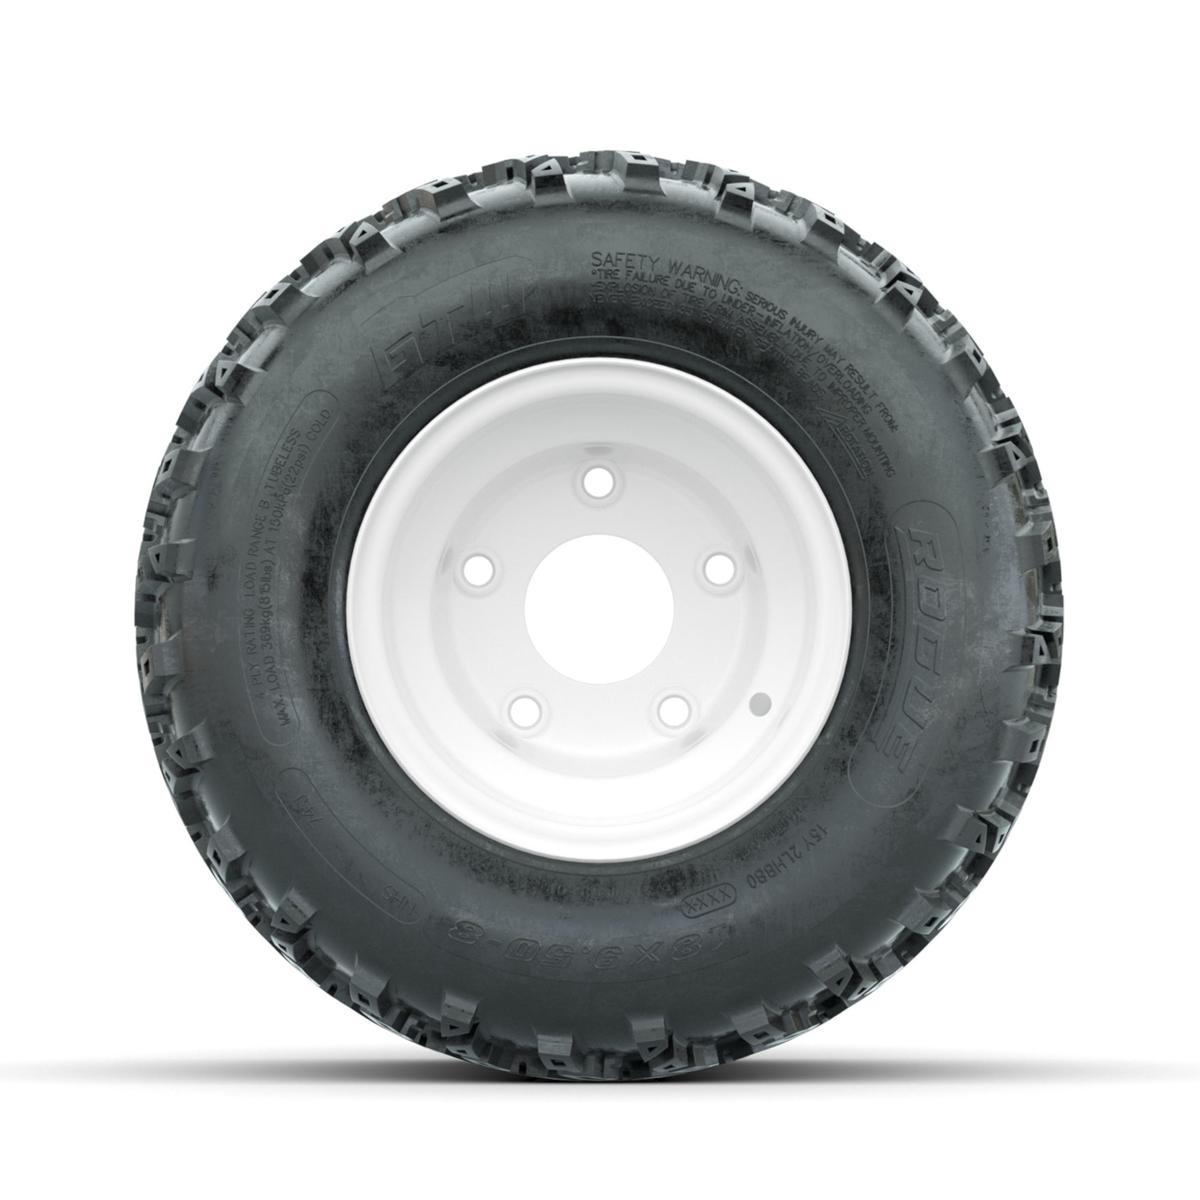 GTW Steel White Centered 5-Hole 8 in Wheels with 18x9.50-8 Rogue All Terrain Tires – Full Set